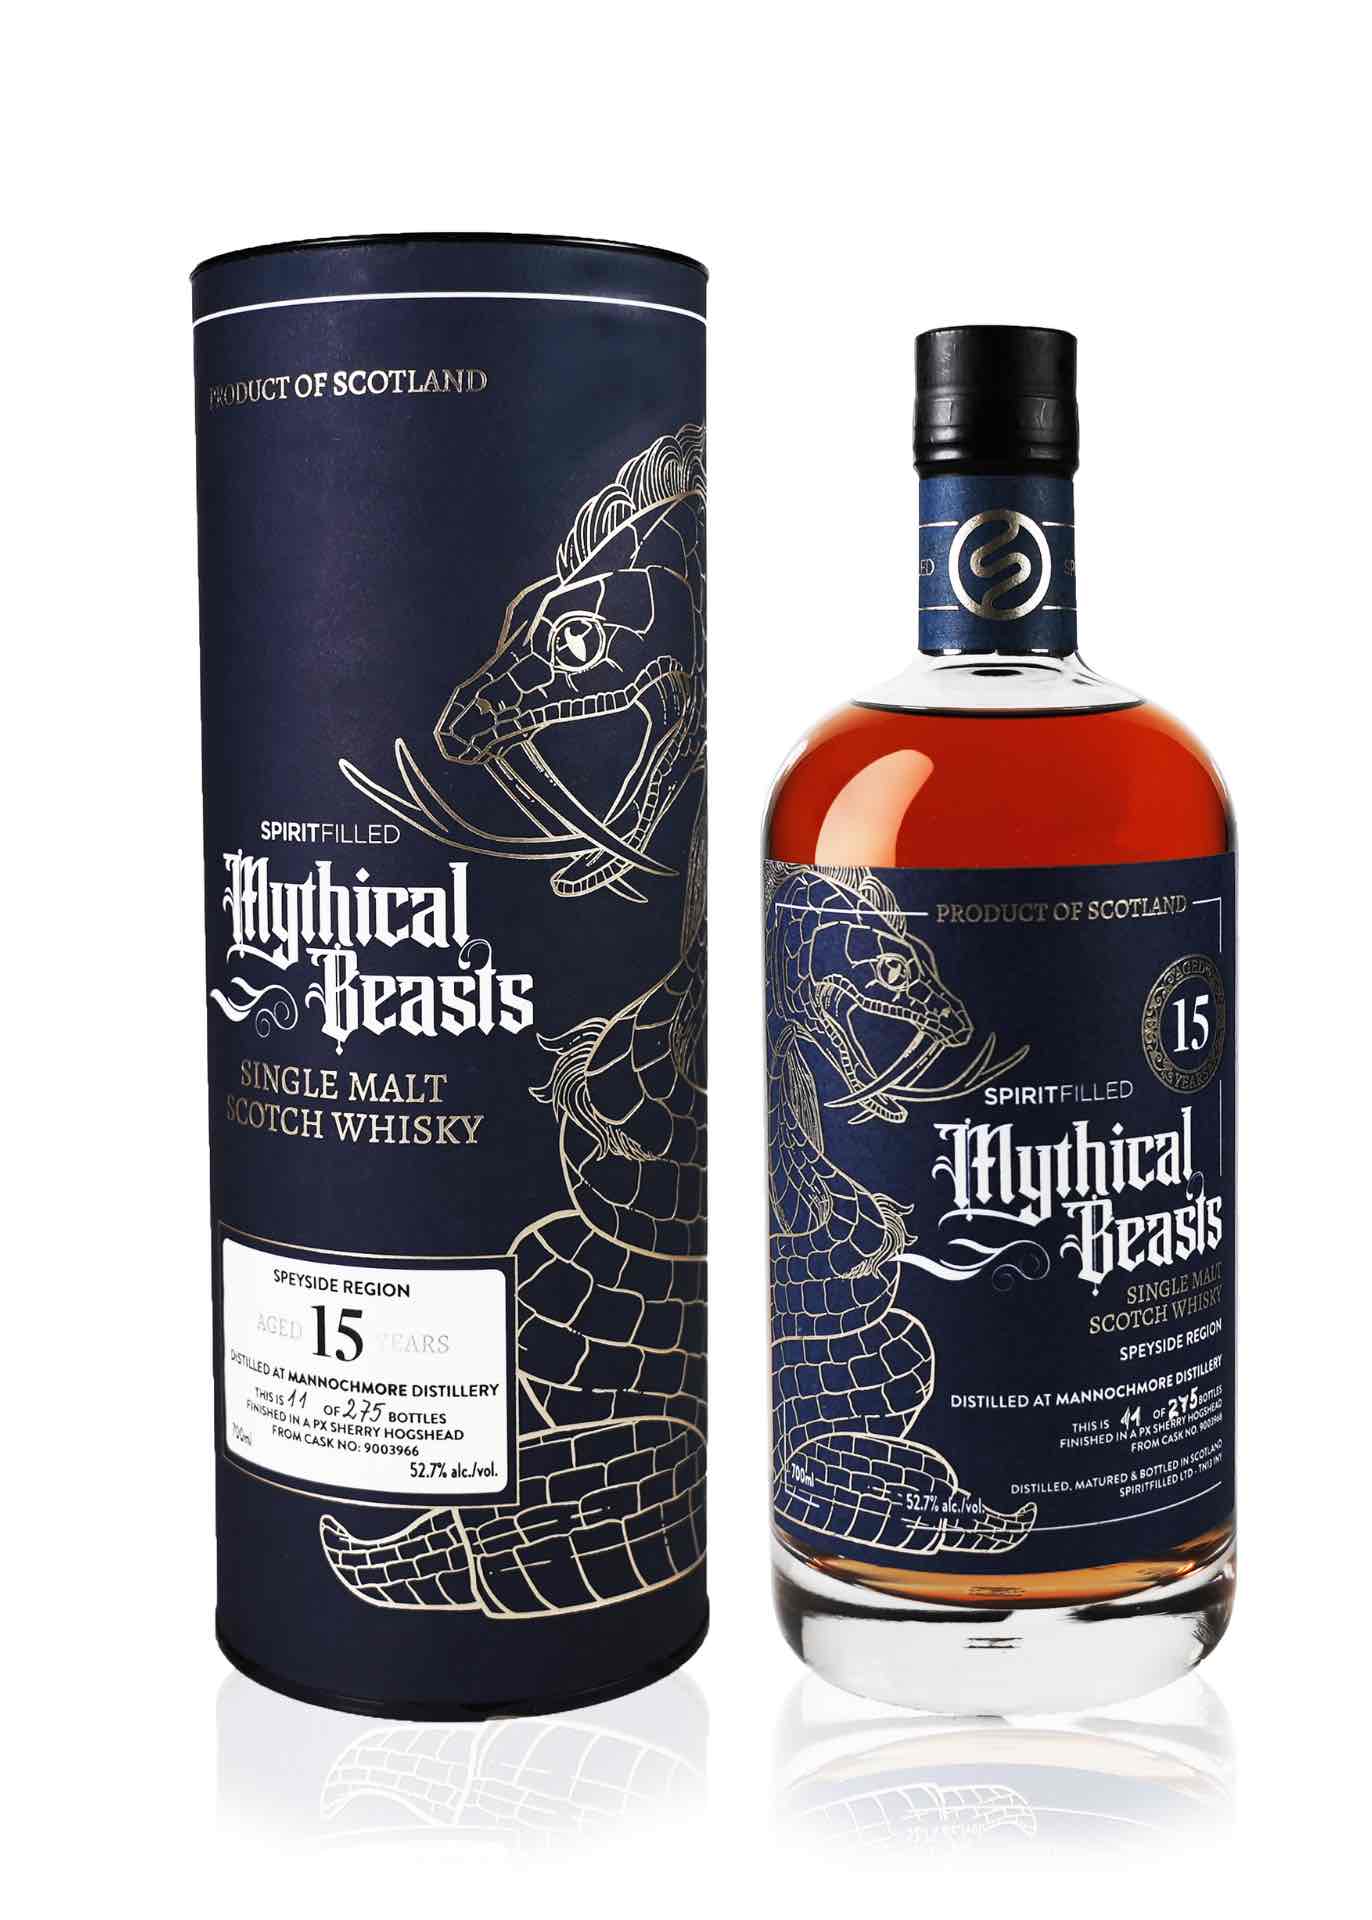 Spiritfilled Mythical Beasts Mannochmore 15 Year Old Whisky